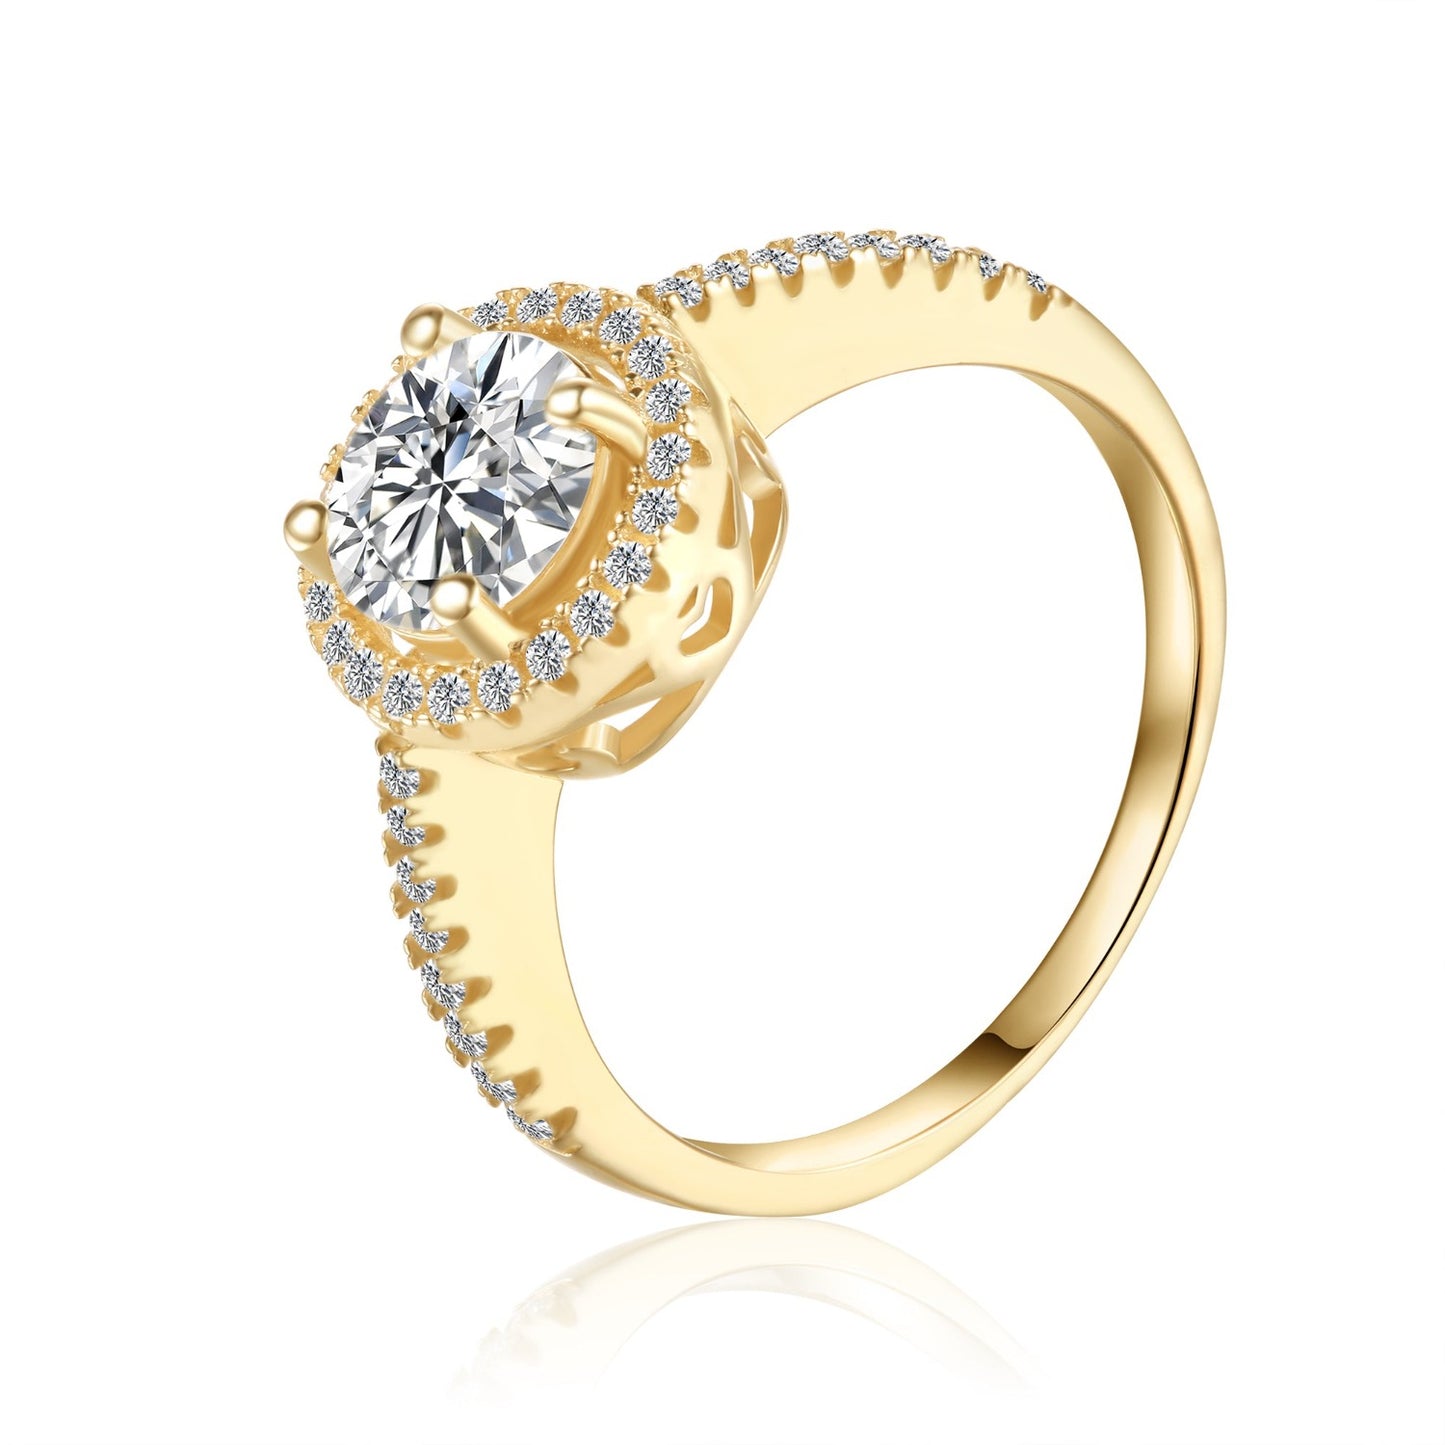 Halo Of Hearts 1.00ct Moissanite Engagement Ring Set in 9ct Yellow Gold